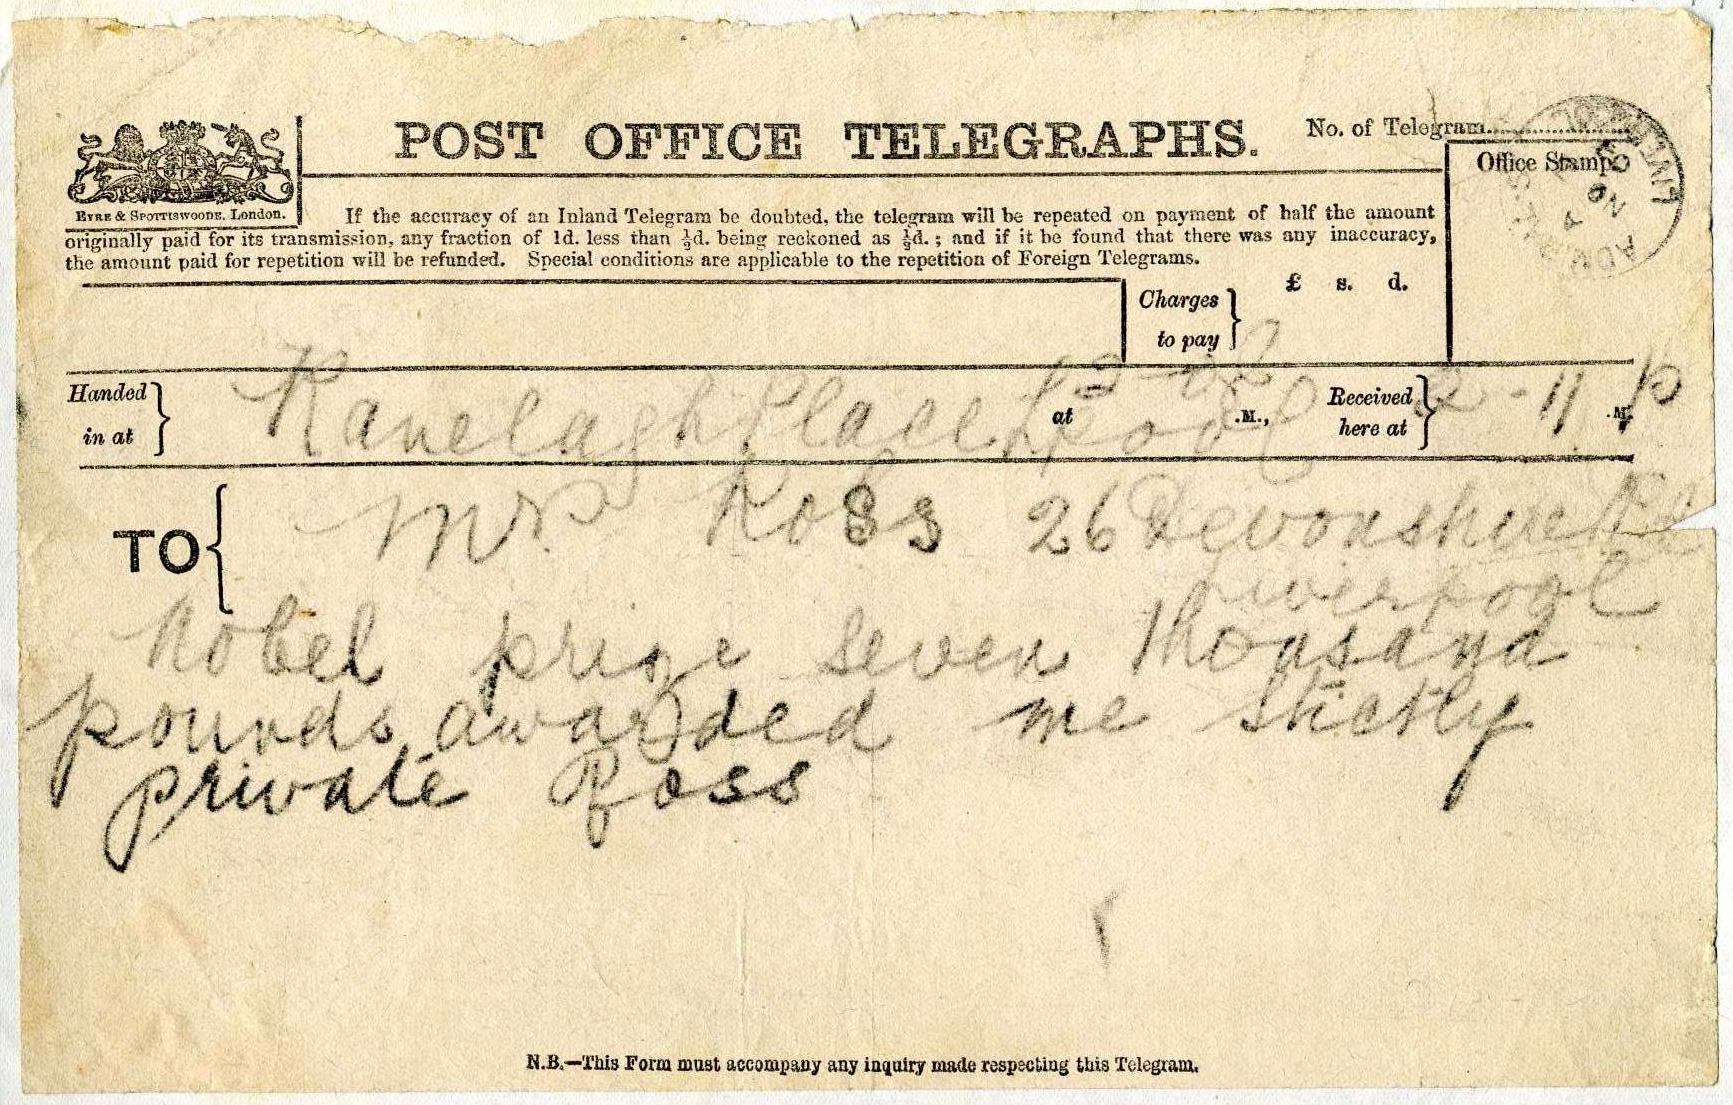 Telegram from Mr Ross to his wife, 1916